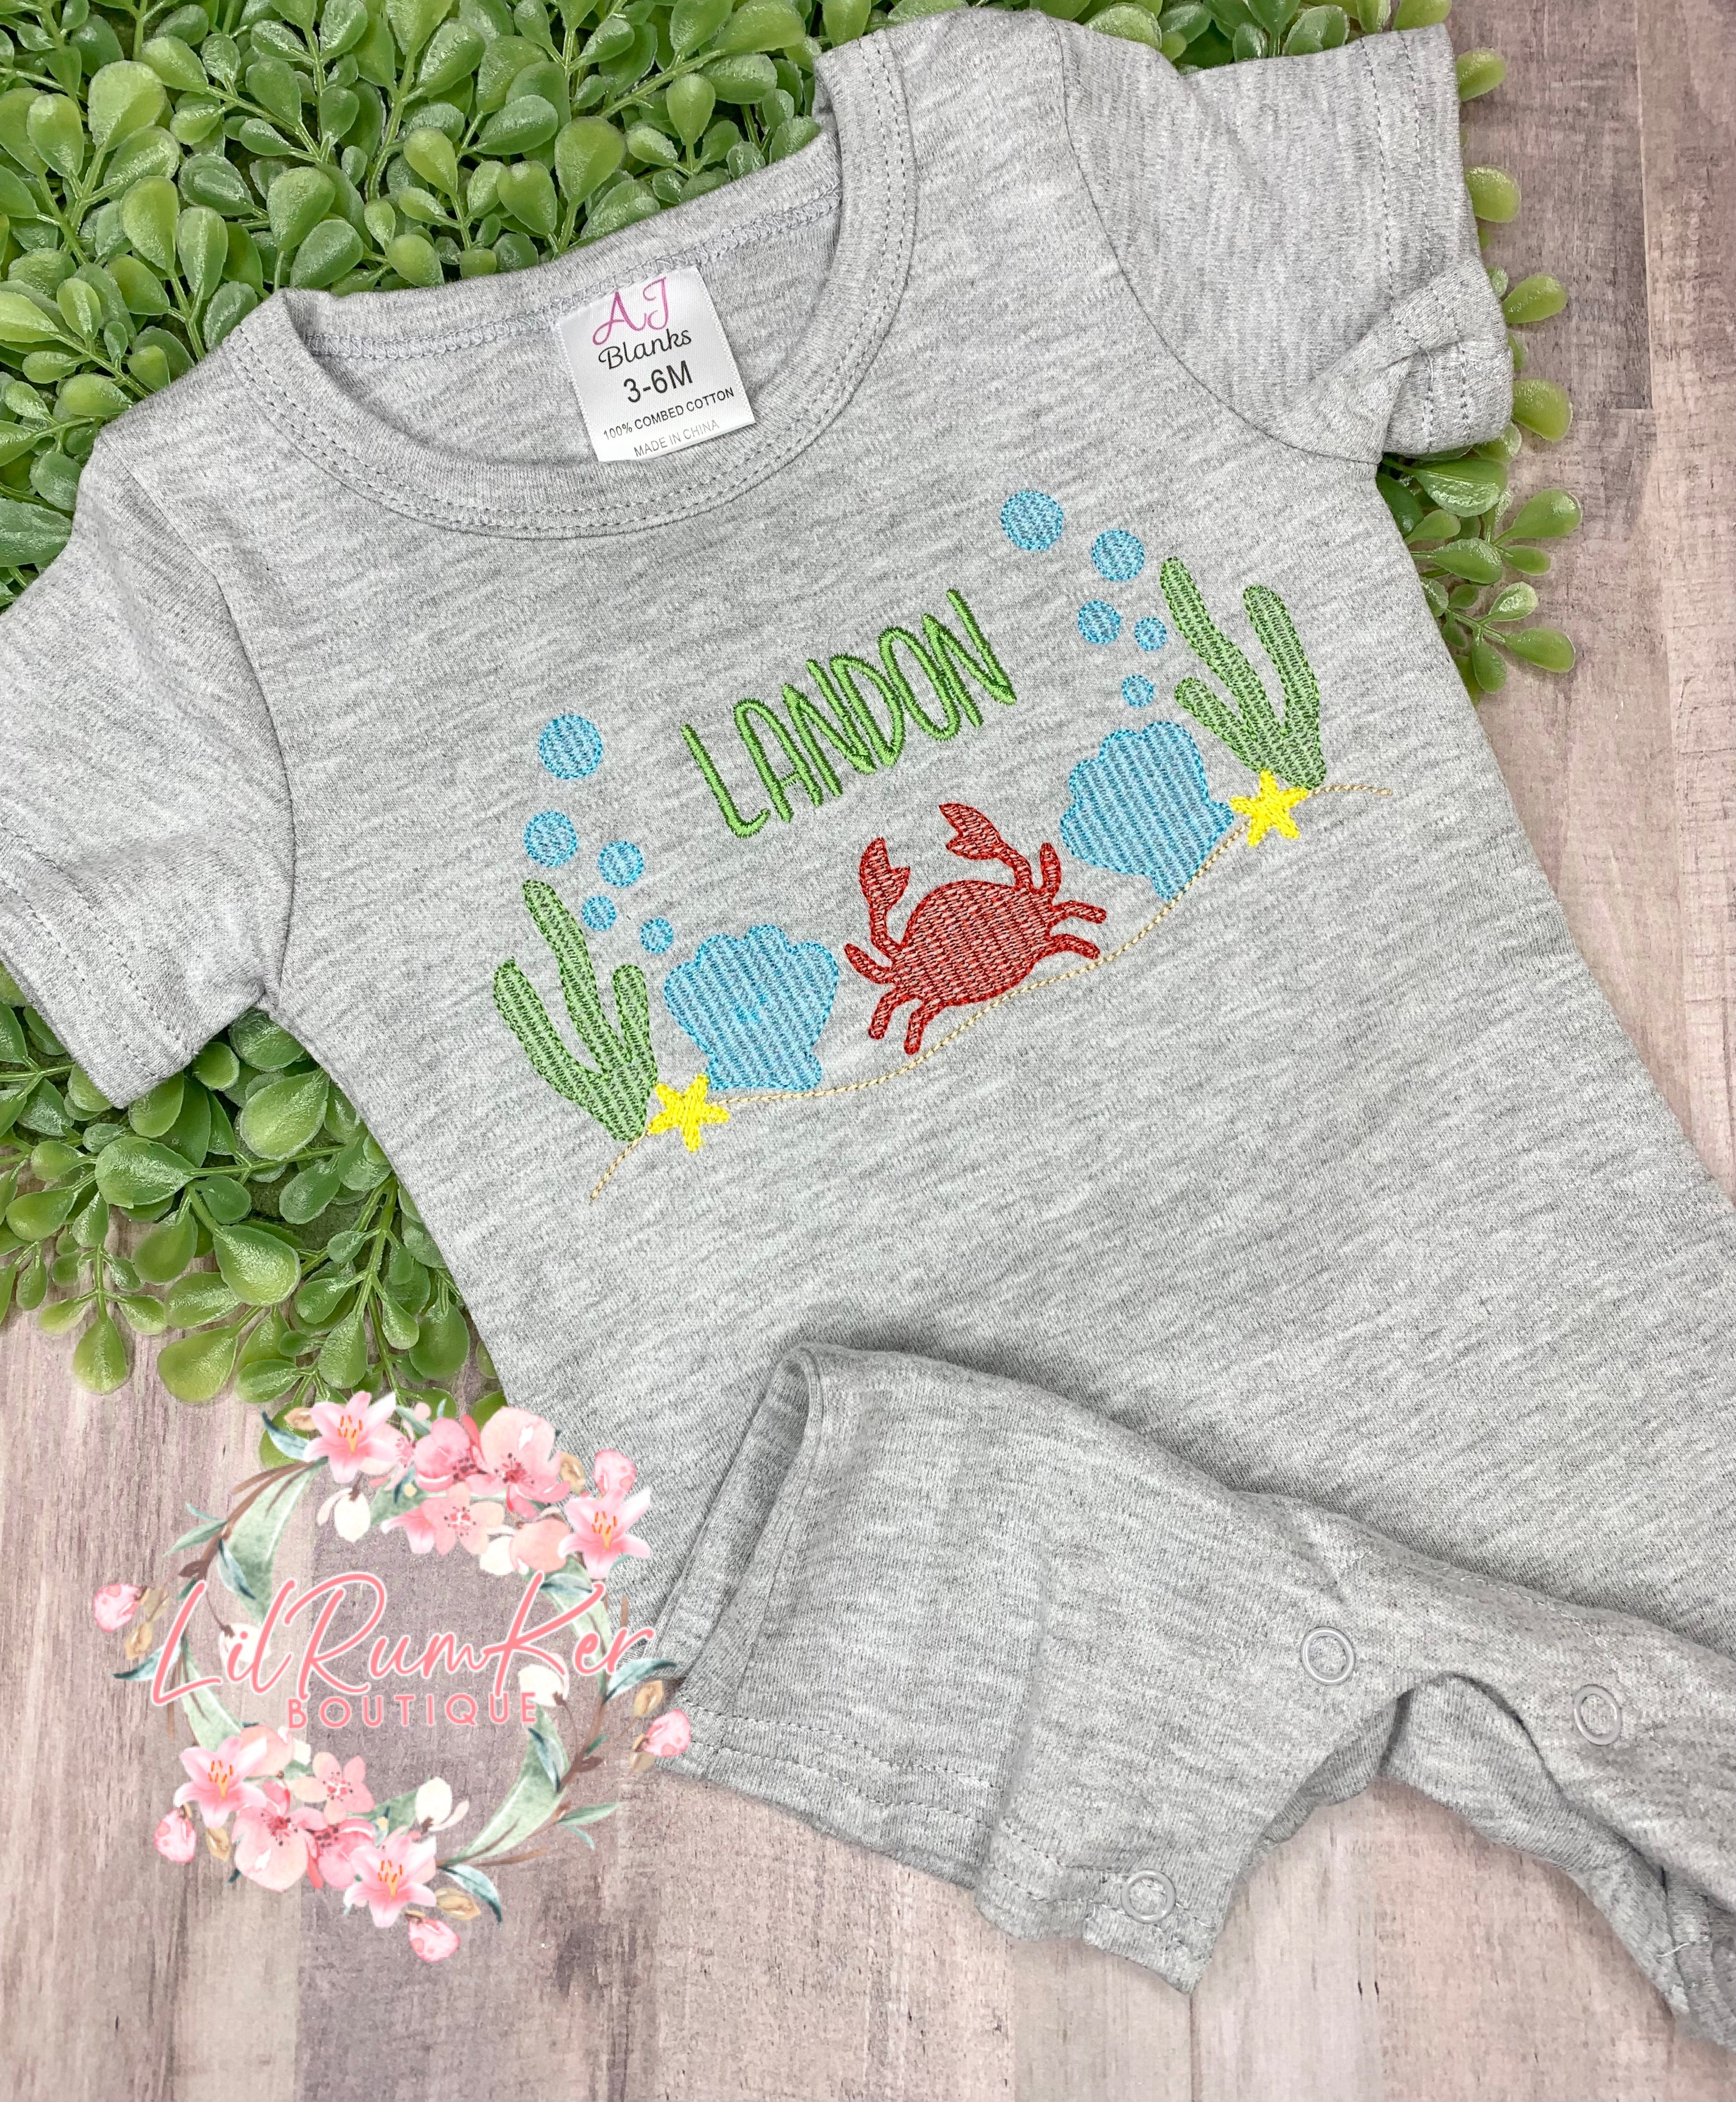 Under the sea romper or shirt